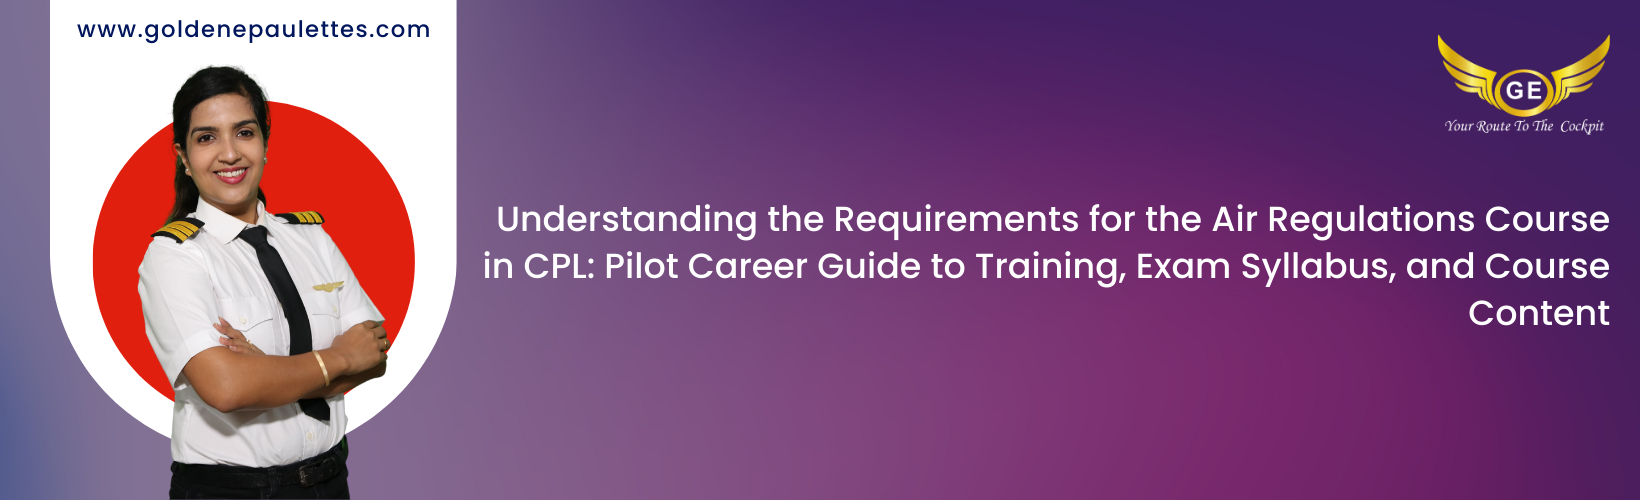 Understanding the Requirements of Air Regulations Course in CPL